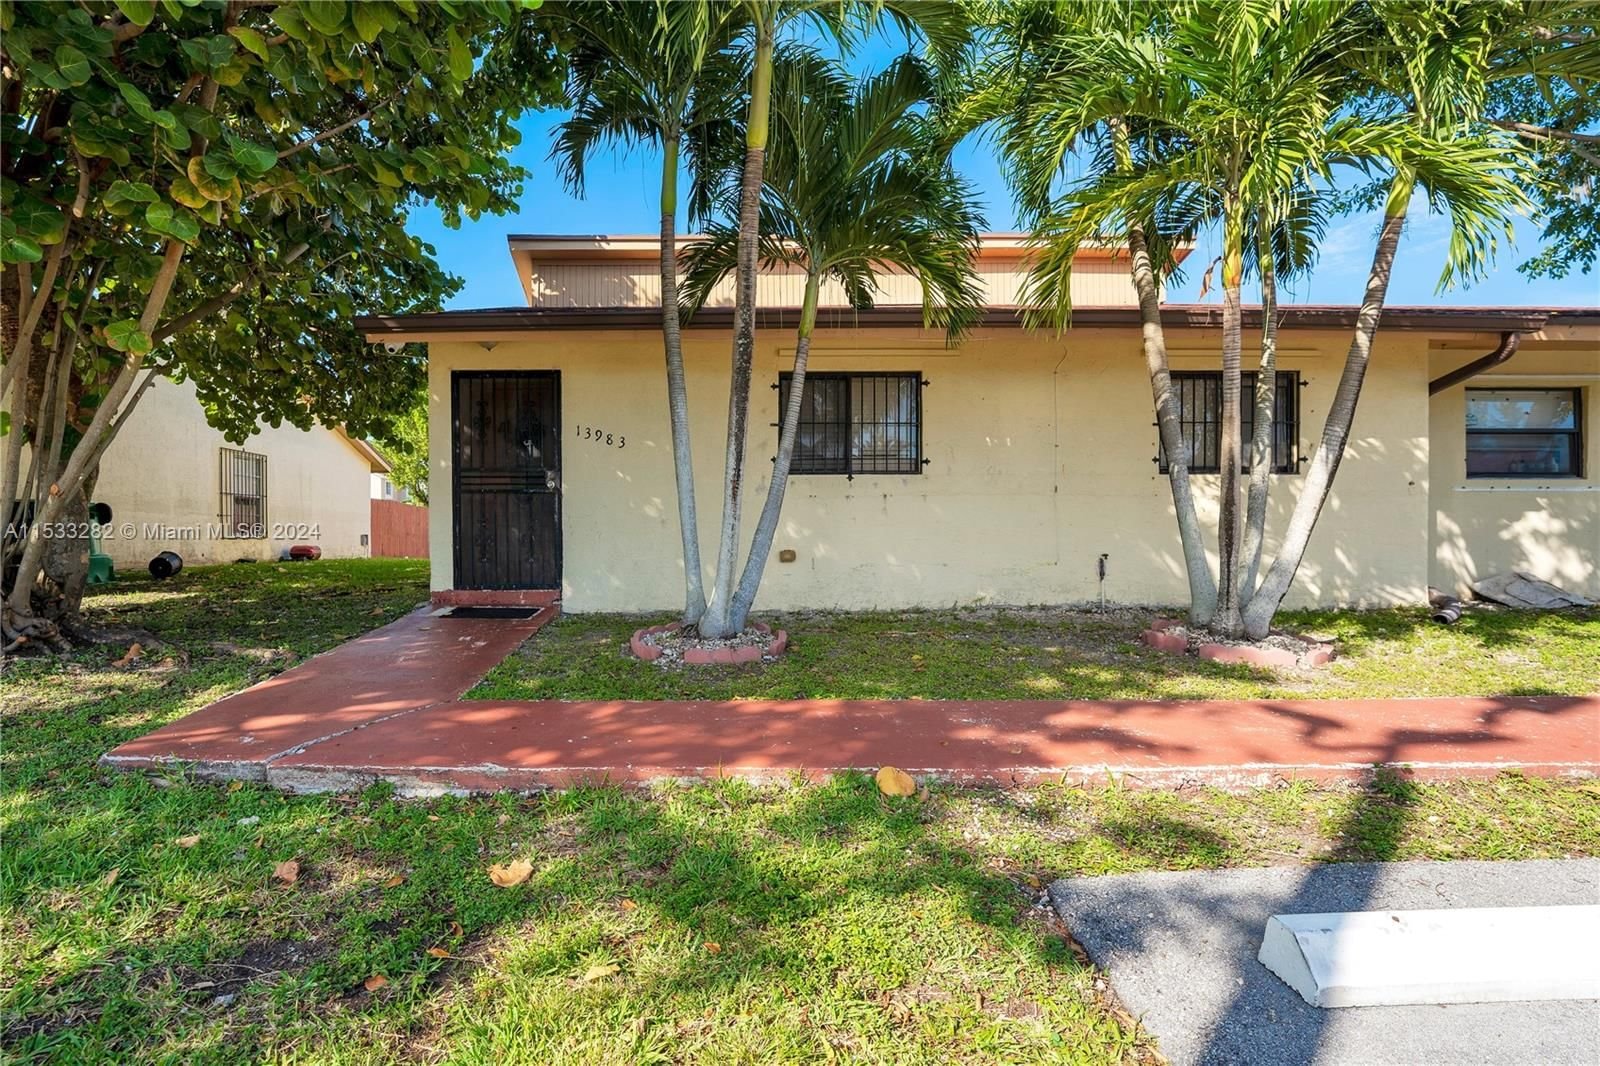 Real estate property located at 13983 280th Ter, Miami-Dade County, WATERSIDE TOWNHOMES SEC 2, Homestead, FL